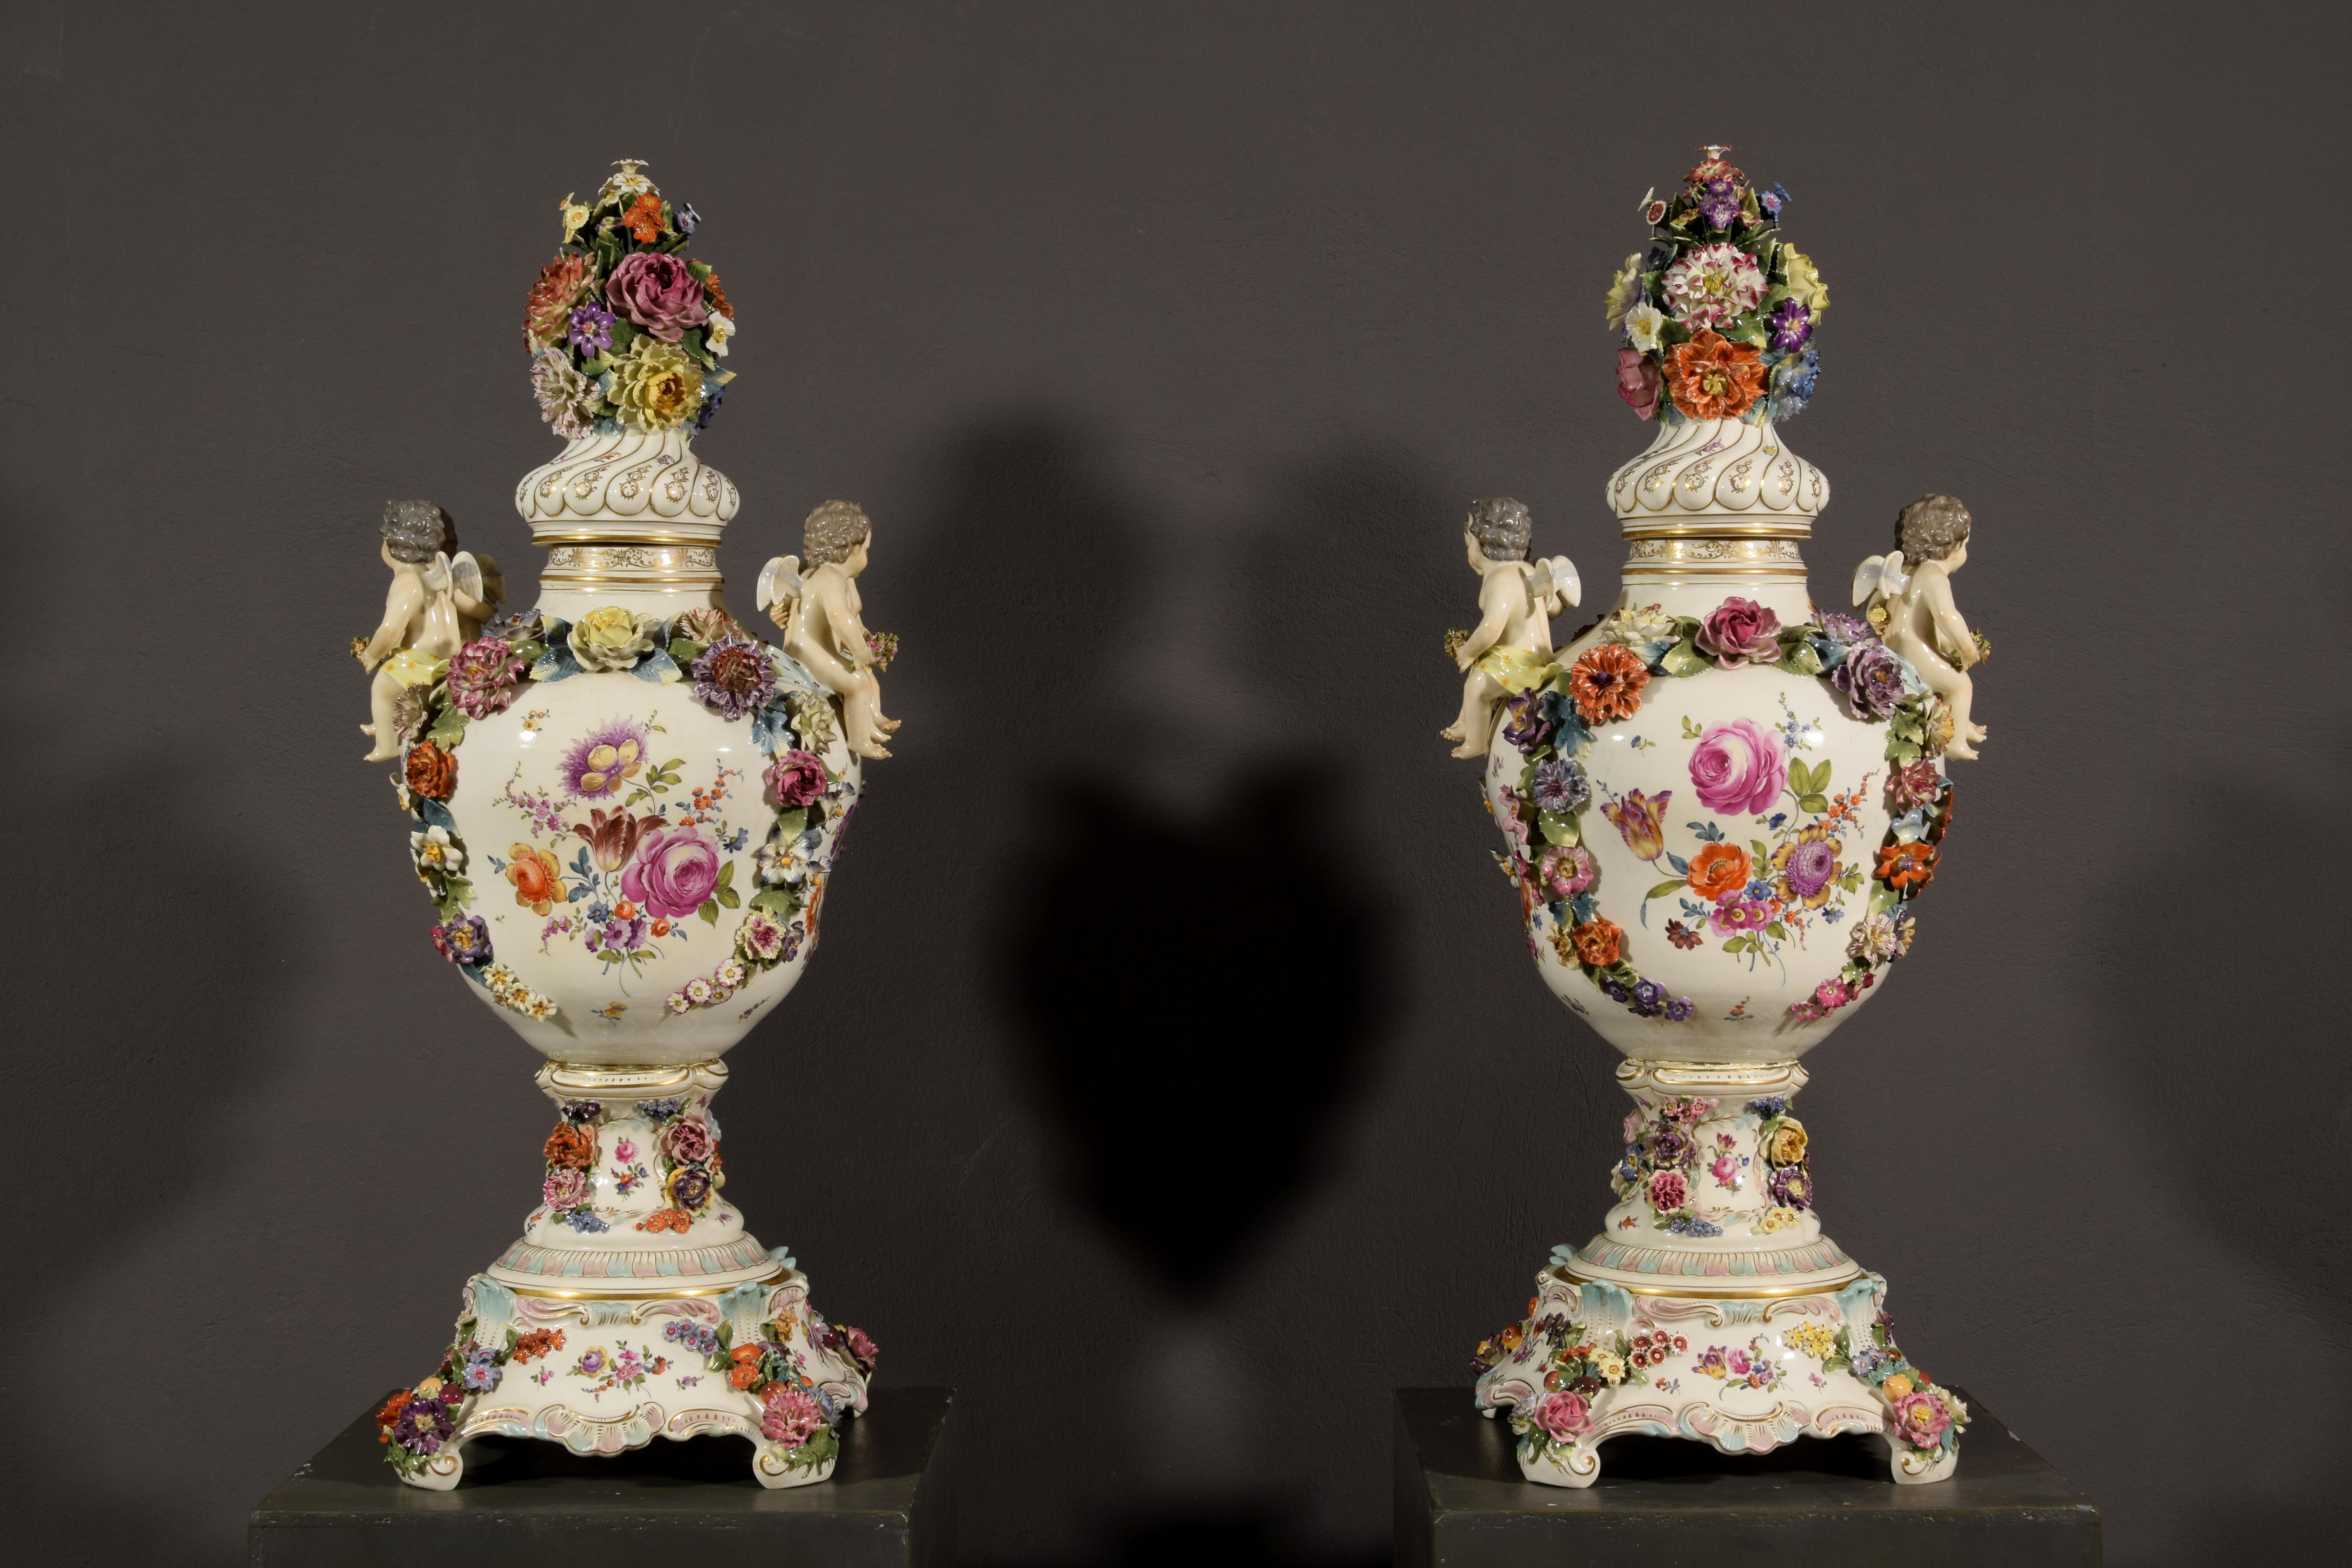 19th Century Pair of German Polychrome Porcelain Vases For Sale 2